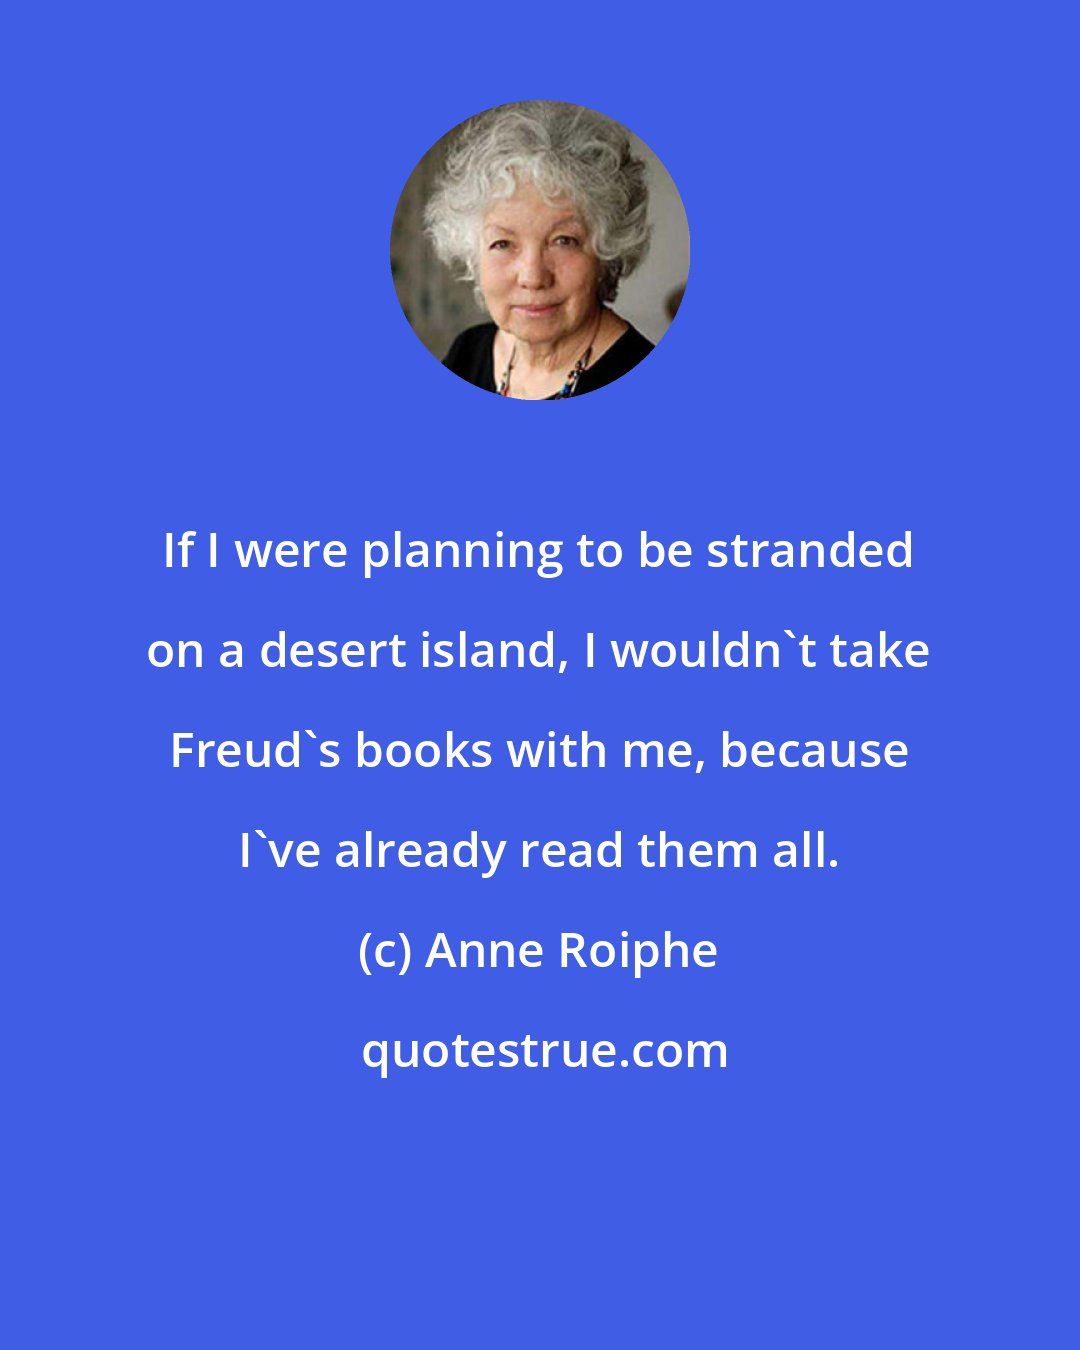 Anne Roiphe: If I were planning to be stranded on a desert island, I wouldn't take Freud's books with me, because I've already read them all.